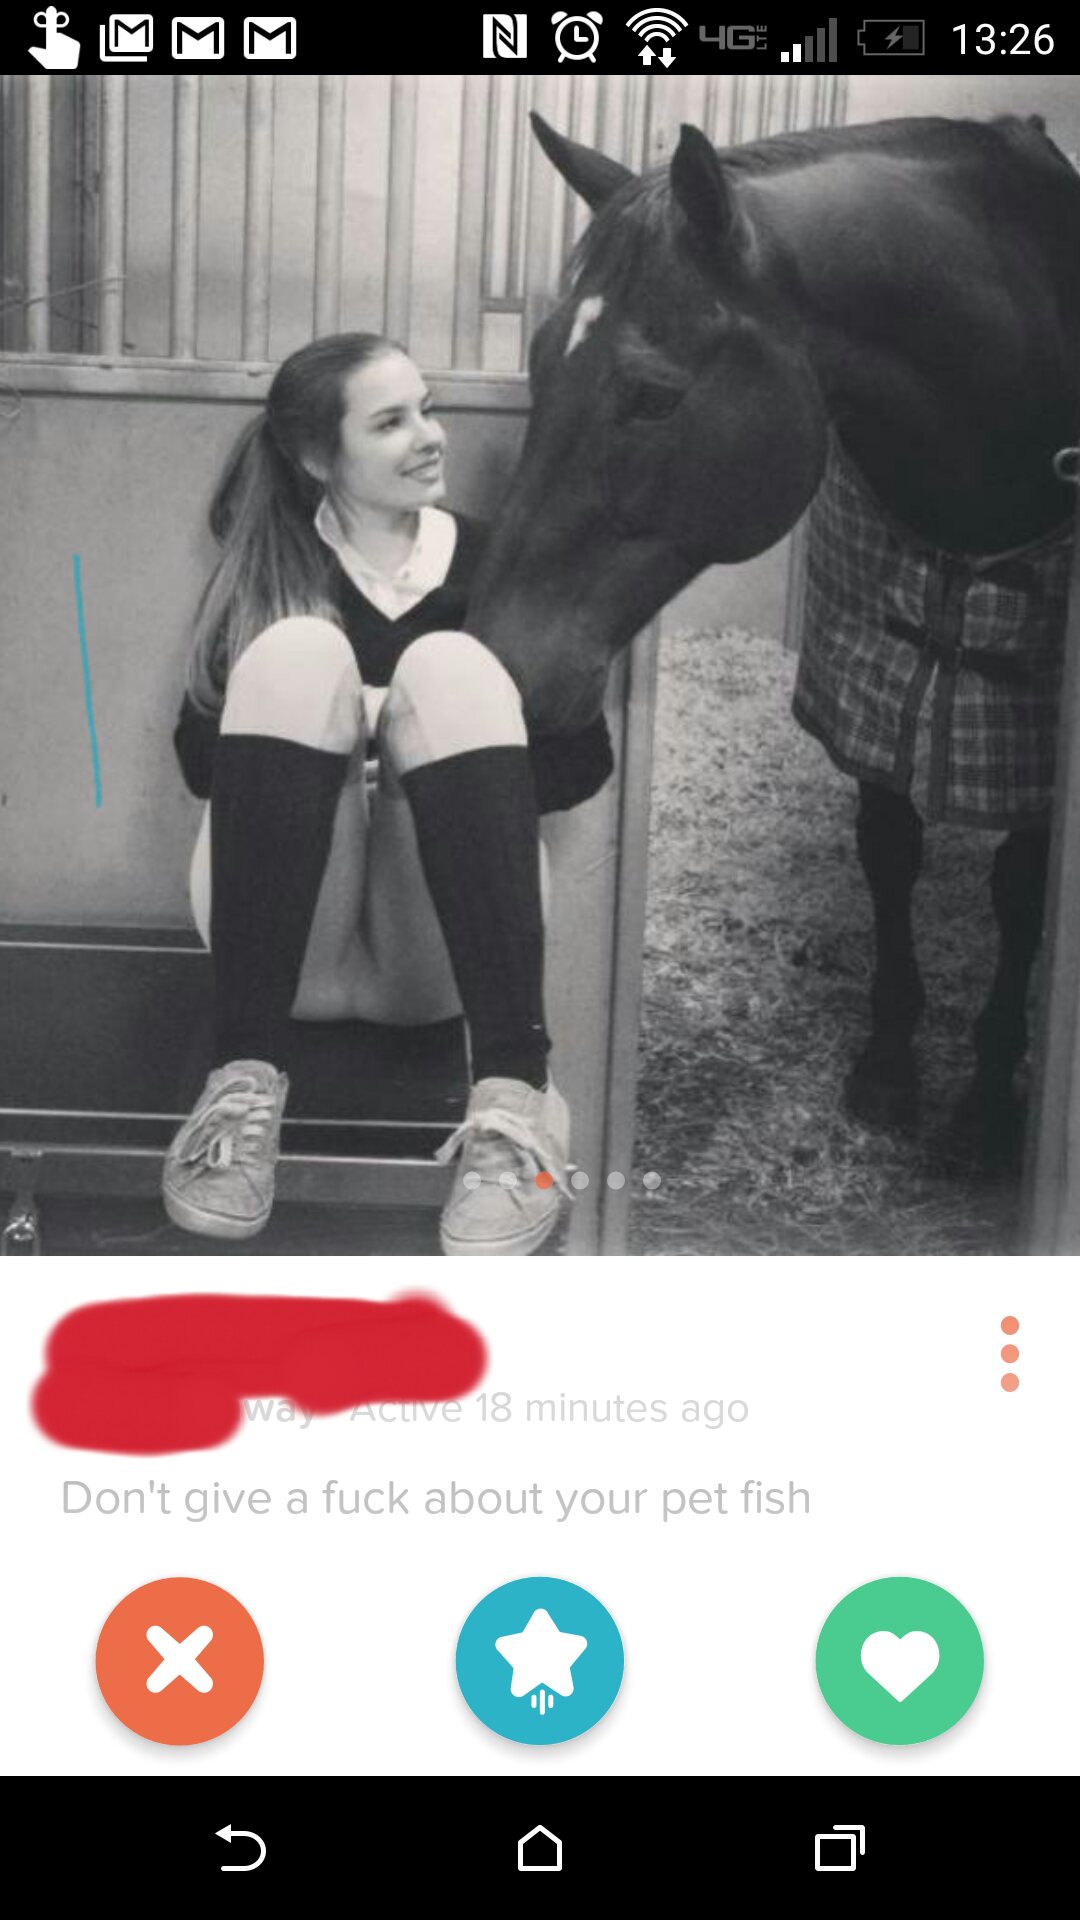 tinder - snapshot - N 4G Way Acuve 18 minutes ago Don't give a fuck about your pet fish